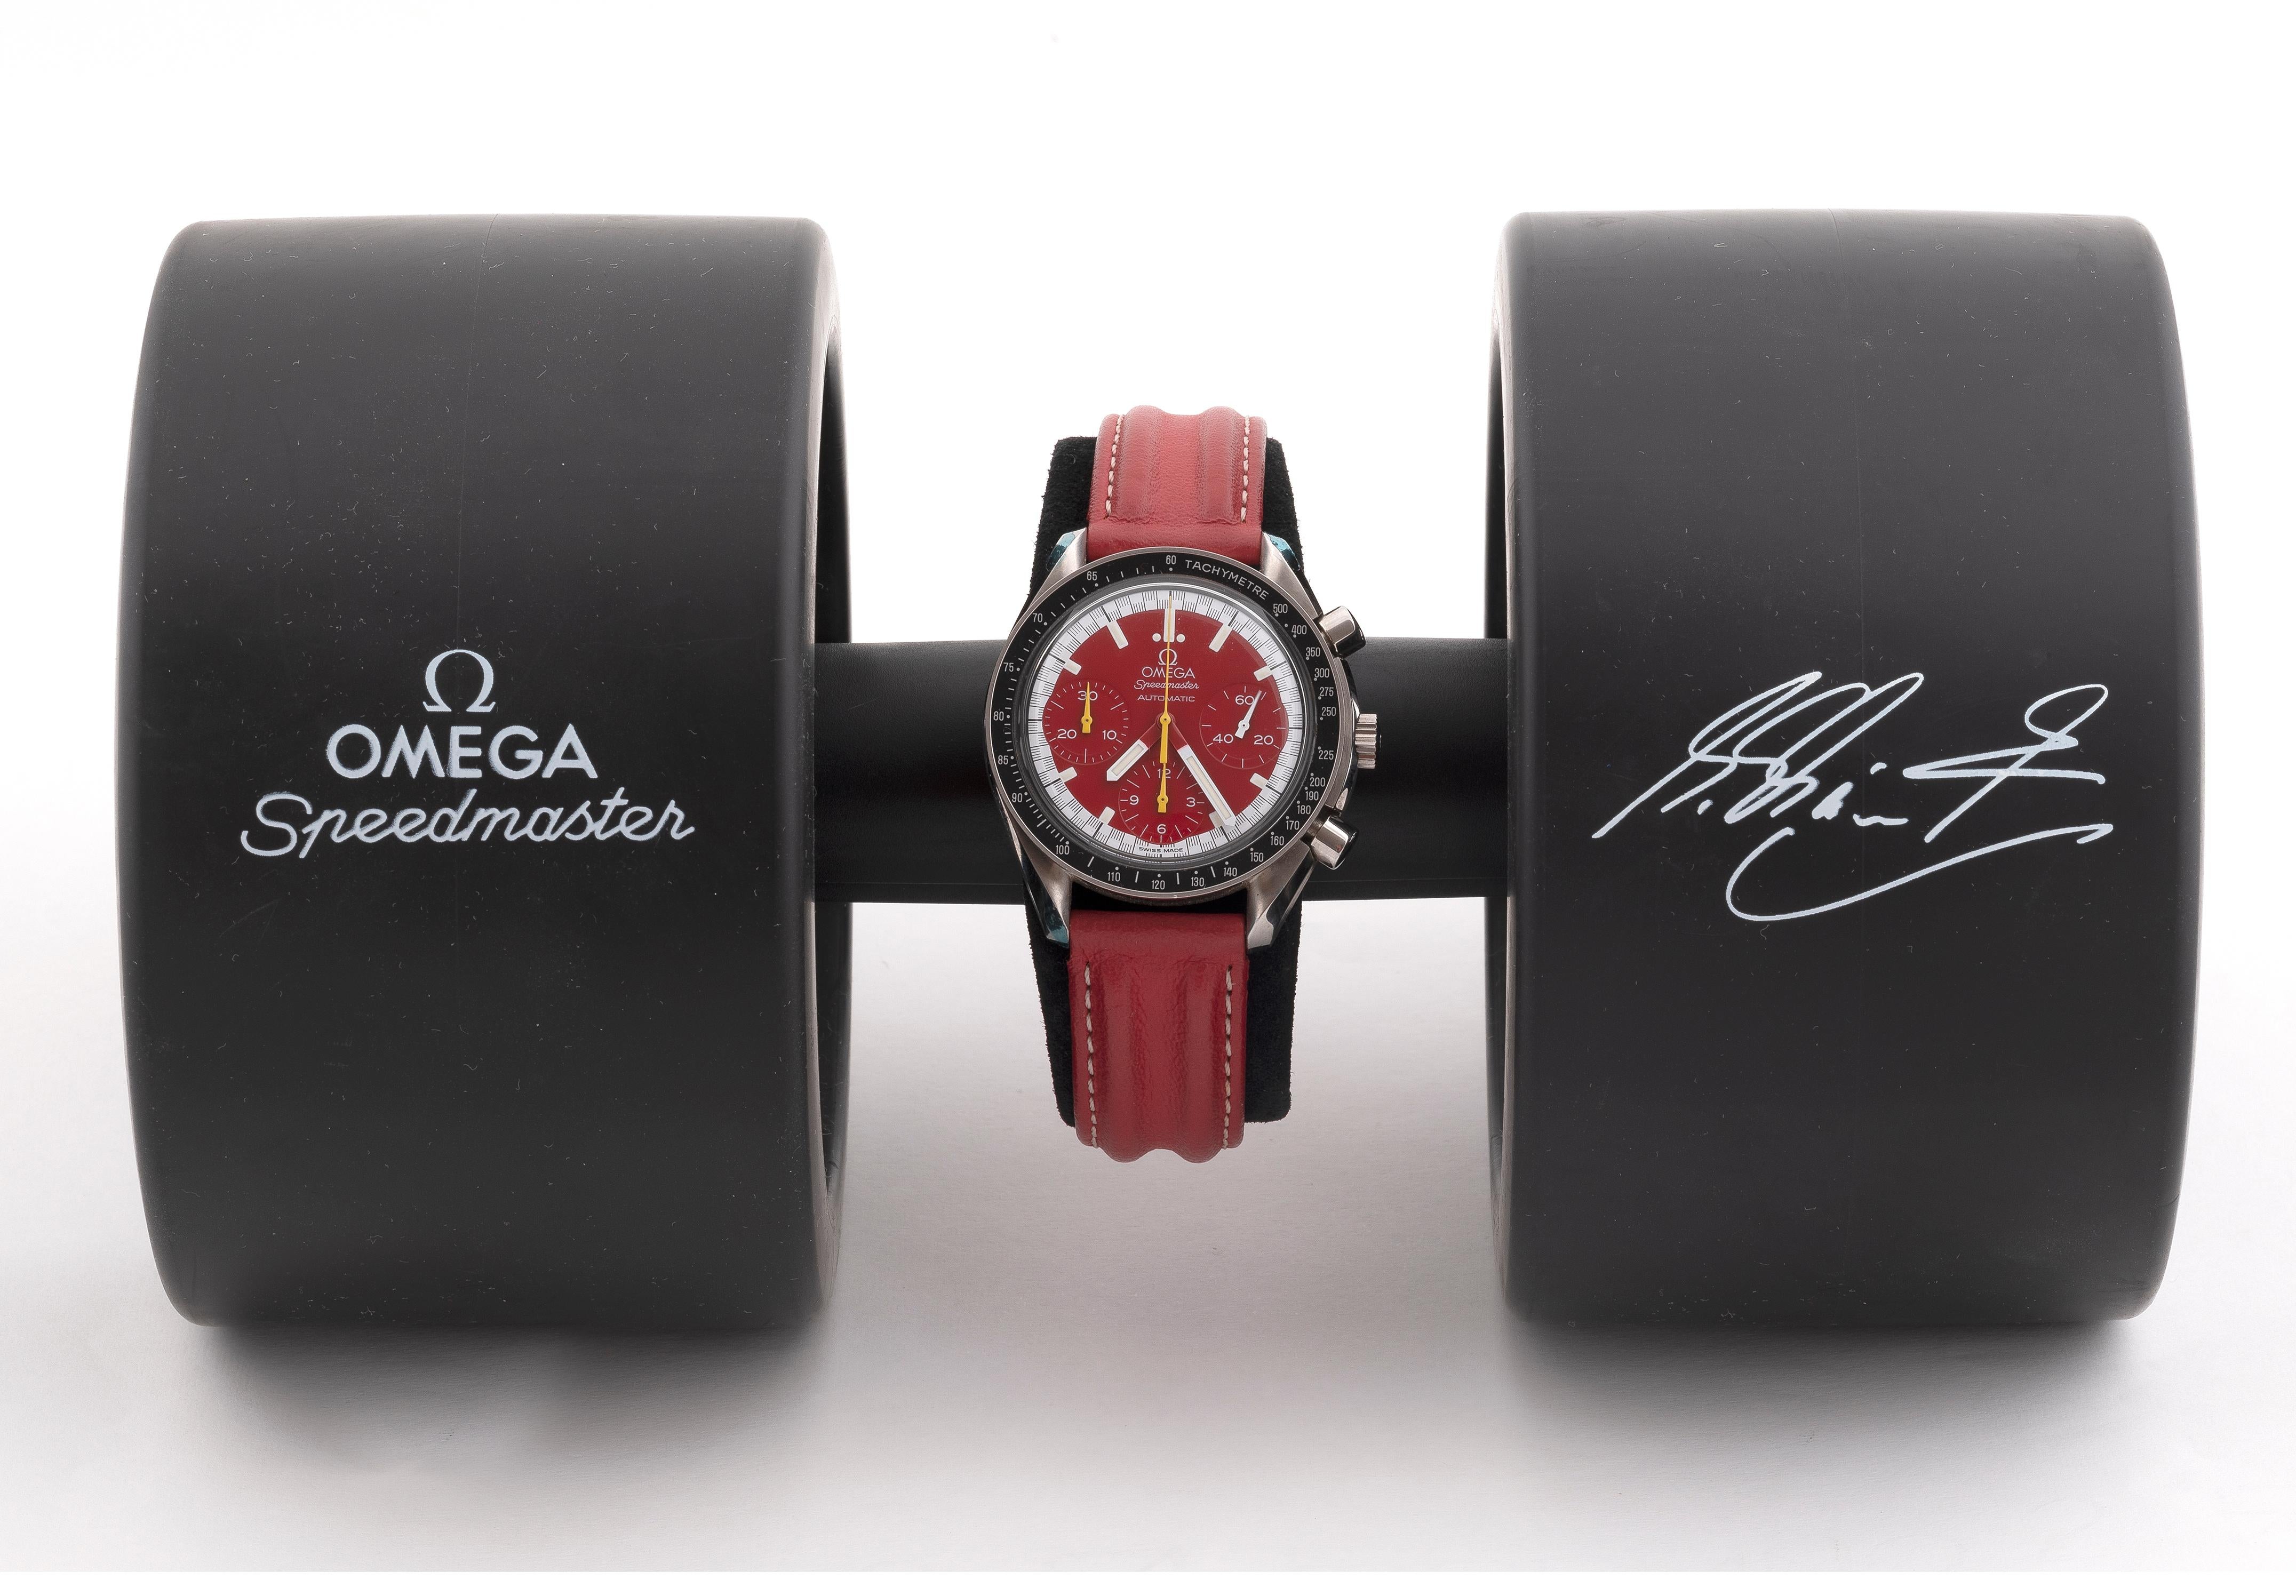 This 39mm. OMEGA SPEEDMASTER Michael Schumacher edition comes complete with everything from 2001. The very cool collapsing dual tire holder, cards and box are all complete. The rubber tire holder has some wear in the writing, which his tends to rub